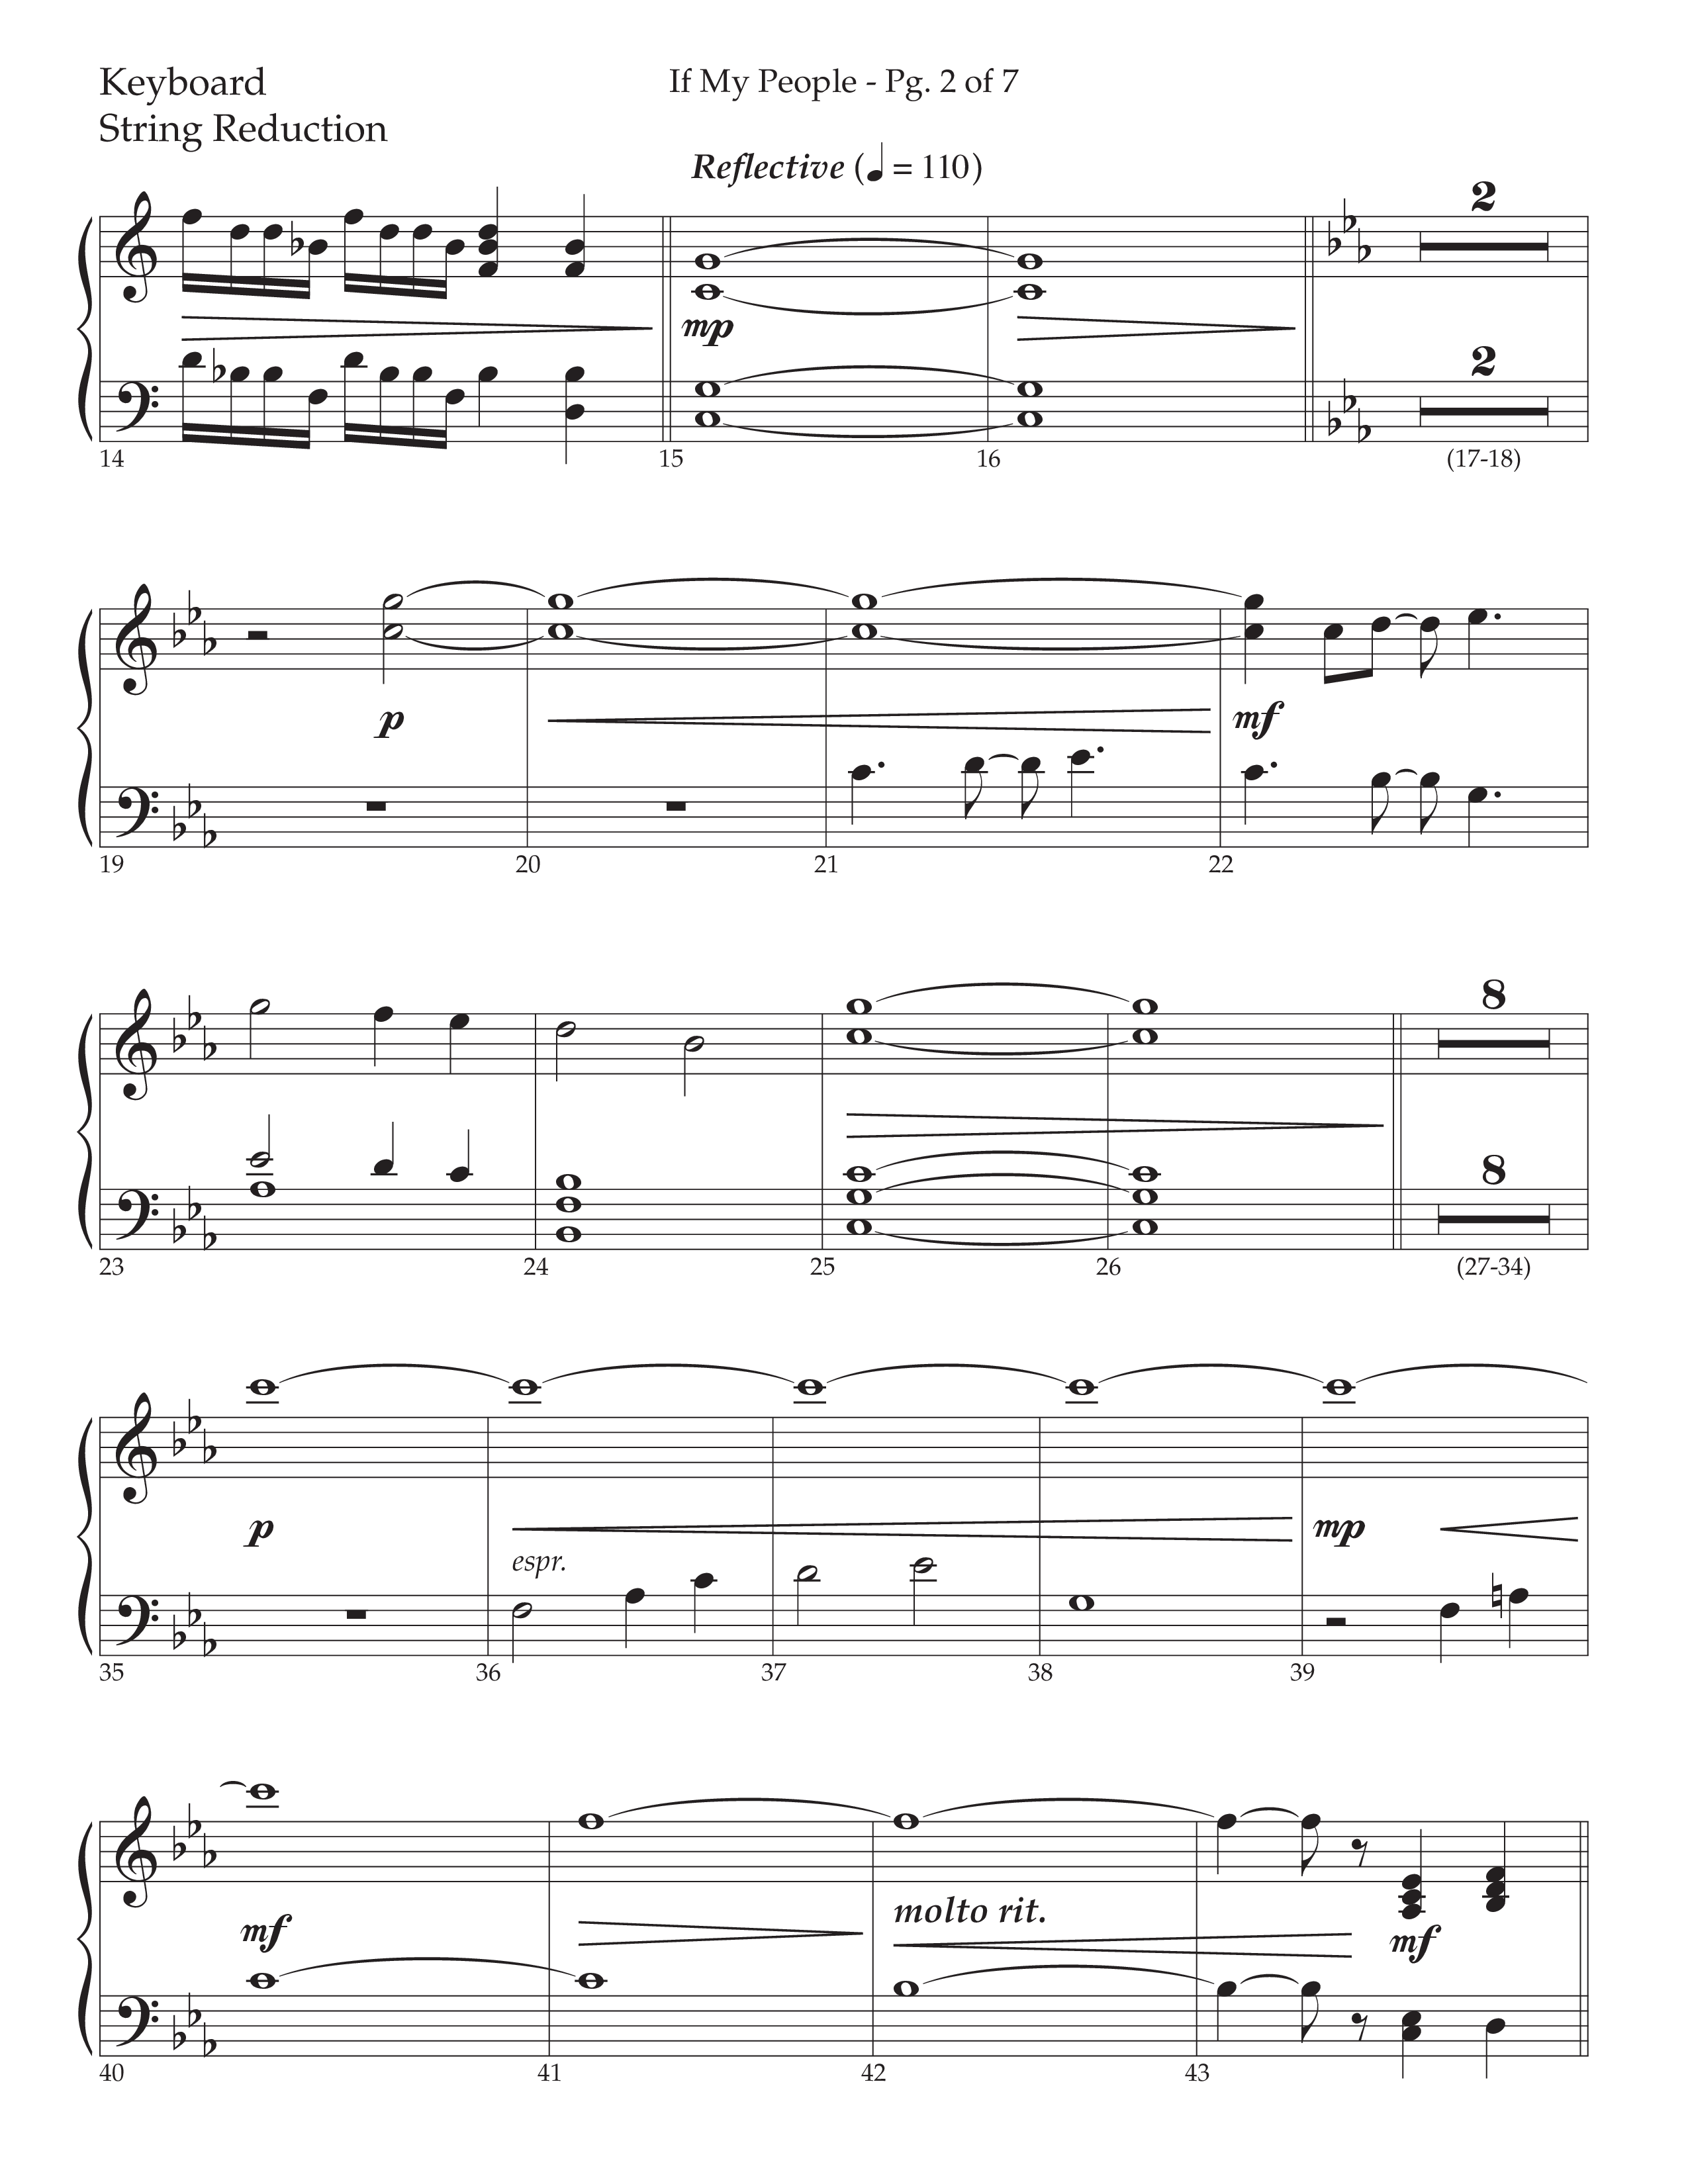 If My People (Choral Anthem SATB) String Reduction (Lifeway Choral / Arr. David Wise / Orch. David Shipps)